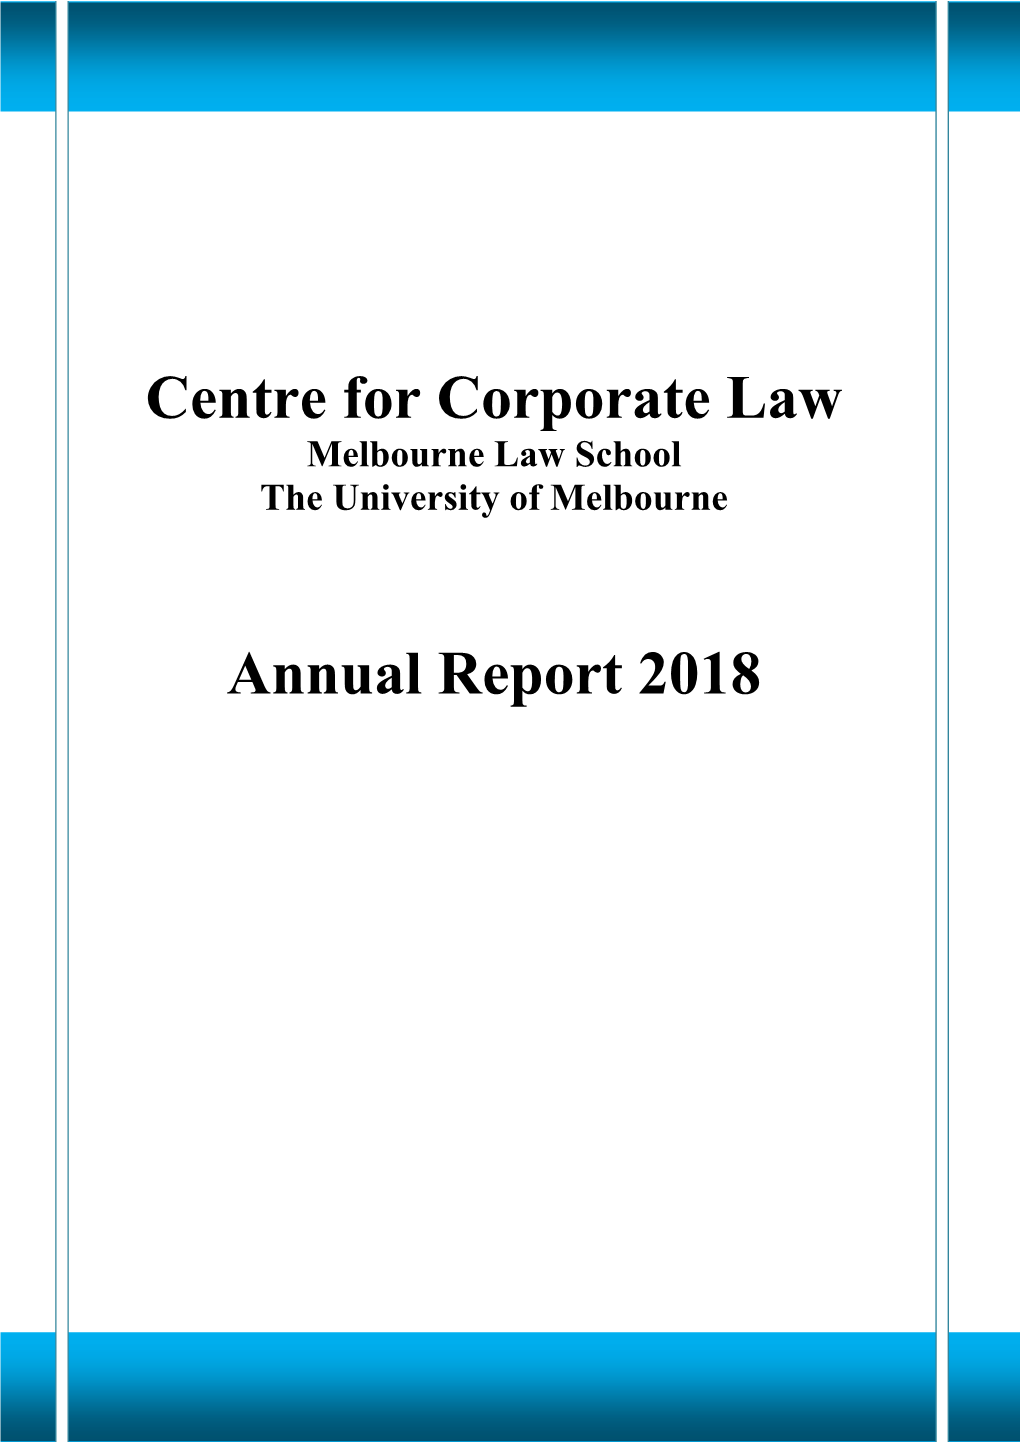 CENTRE for CORPORATE LAW Annual Report 2018 Contents